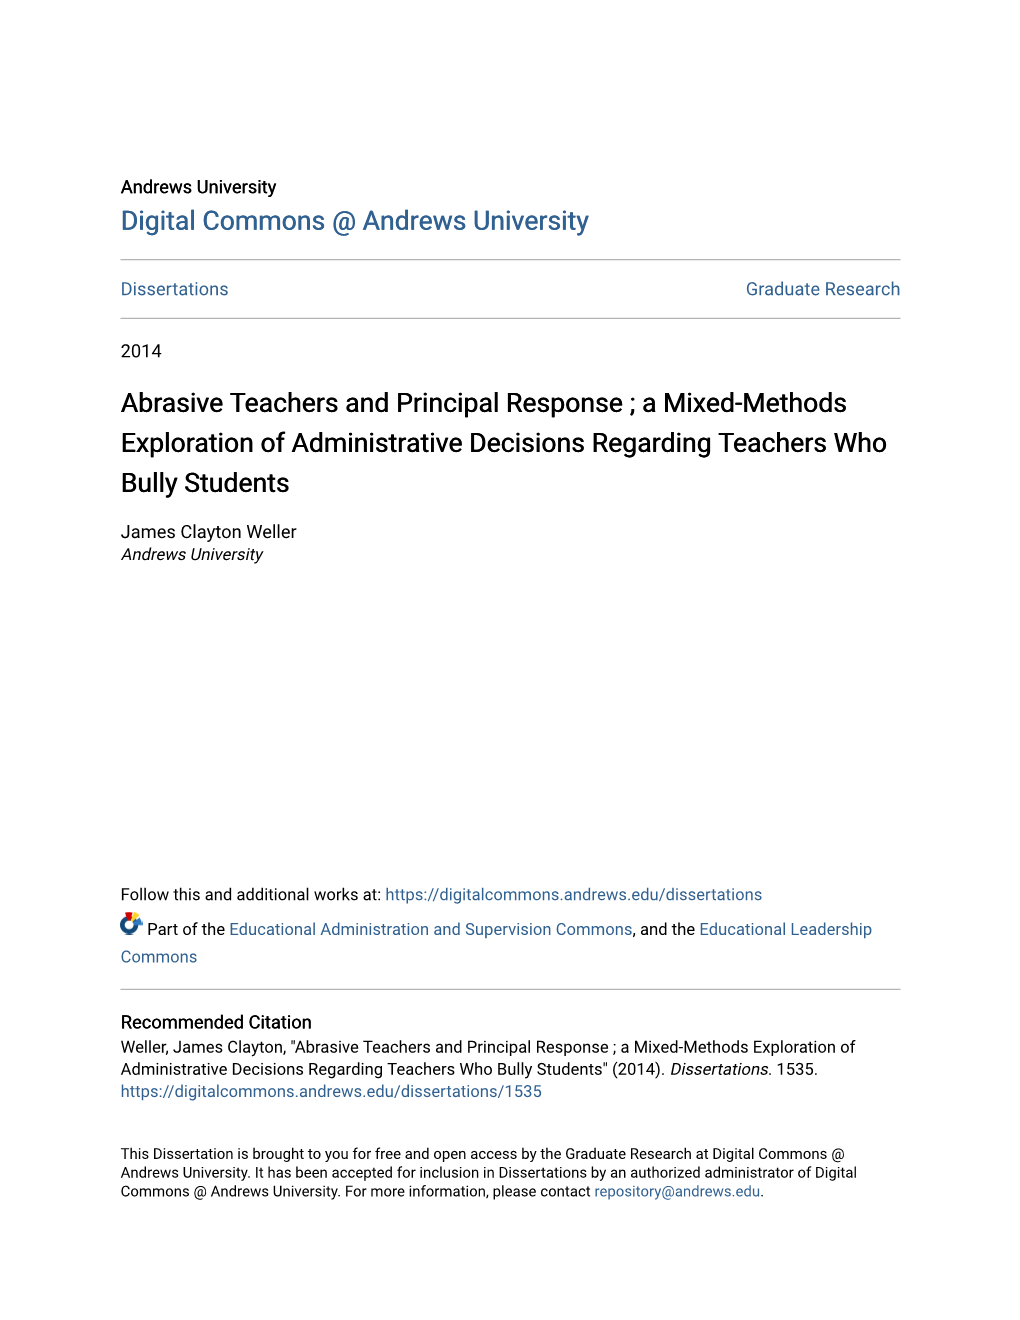 Abrasive Teachers and Principal Response ; a Mixed-Methods Exploration of Administrative Decisions Regarding Teachers Who Bully Students